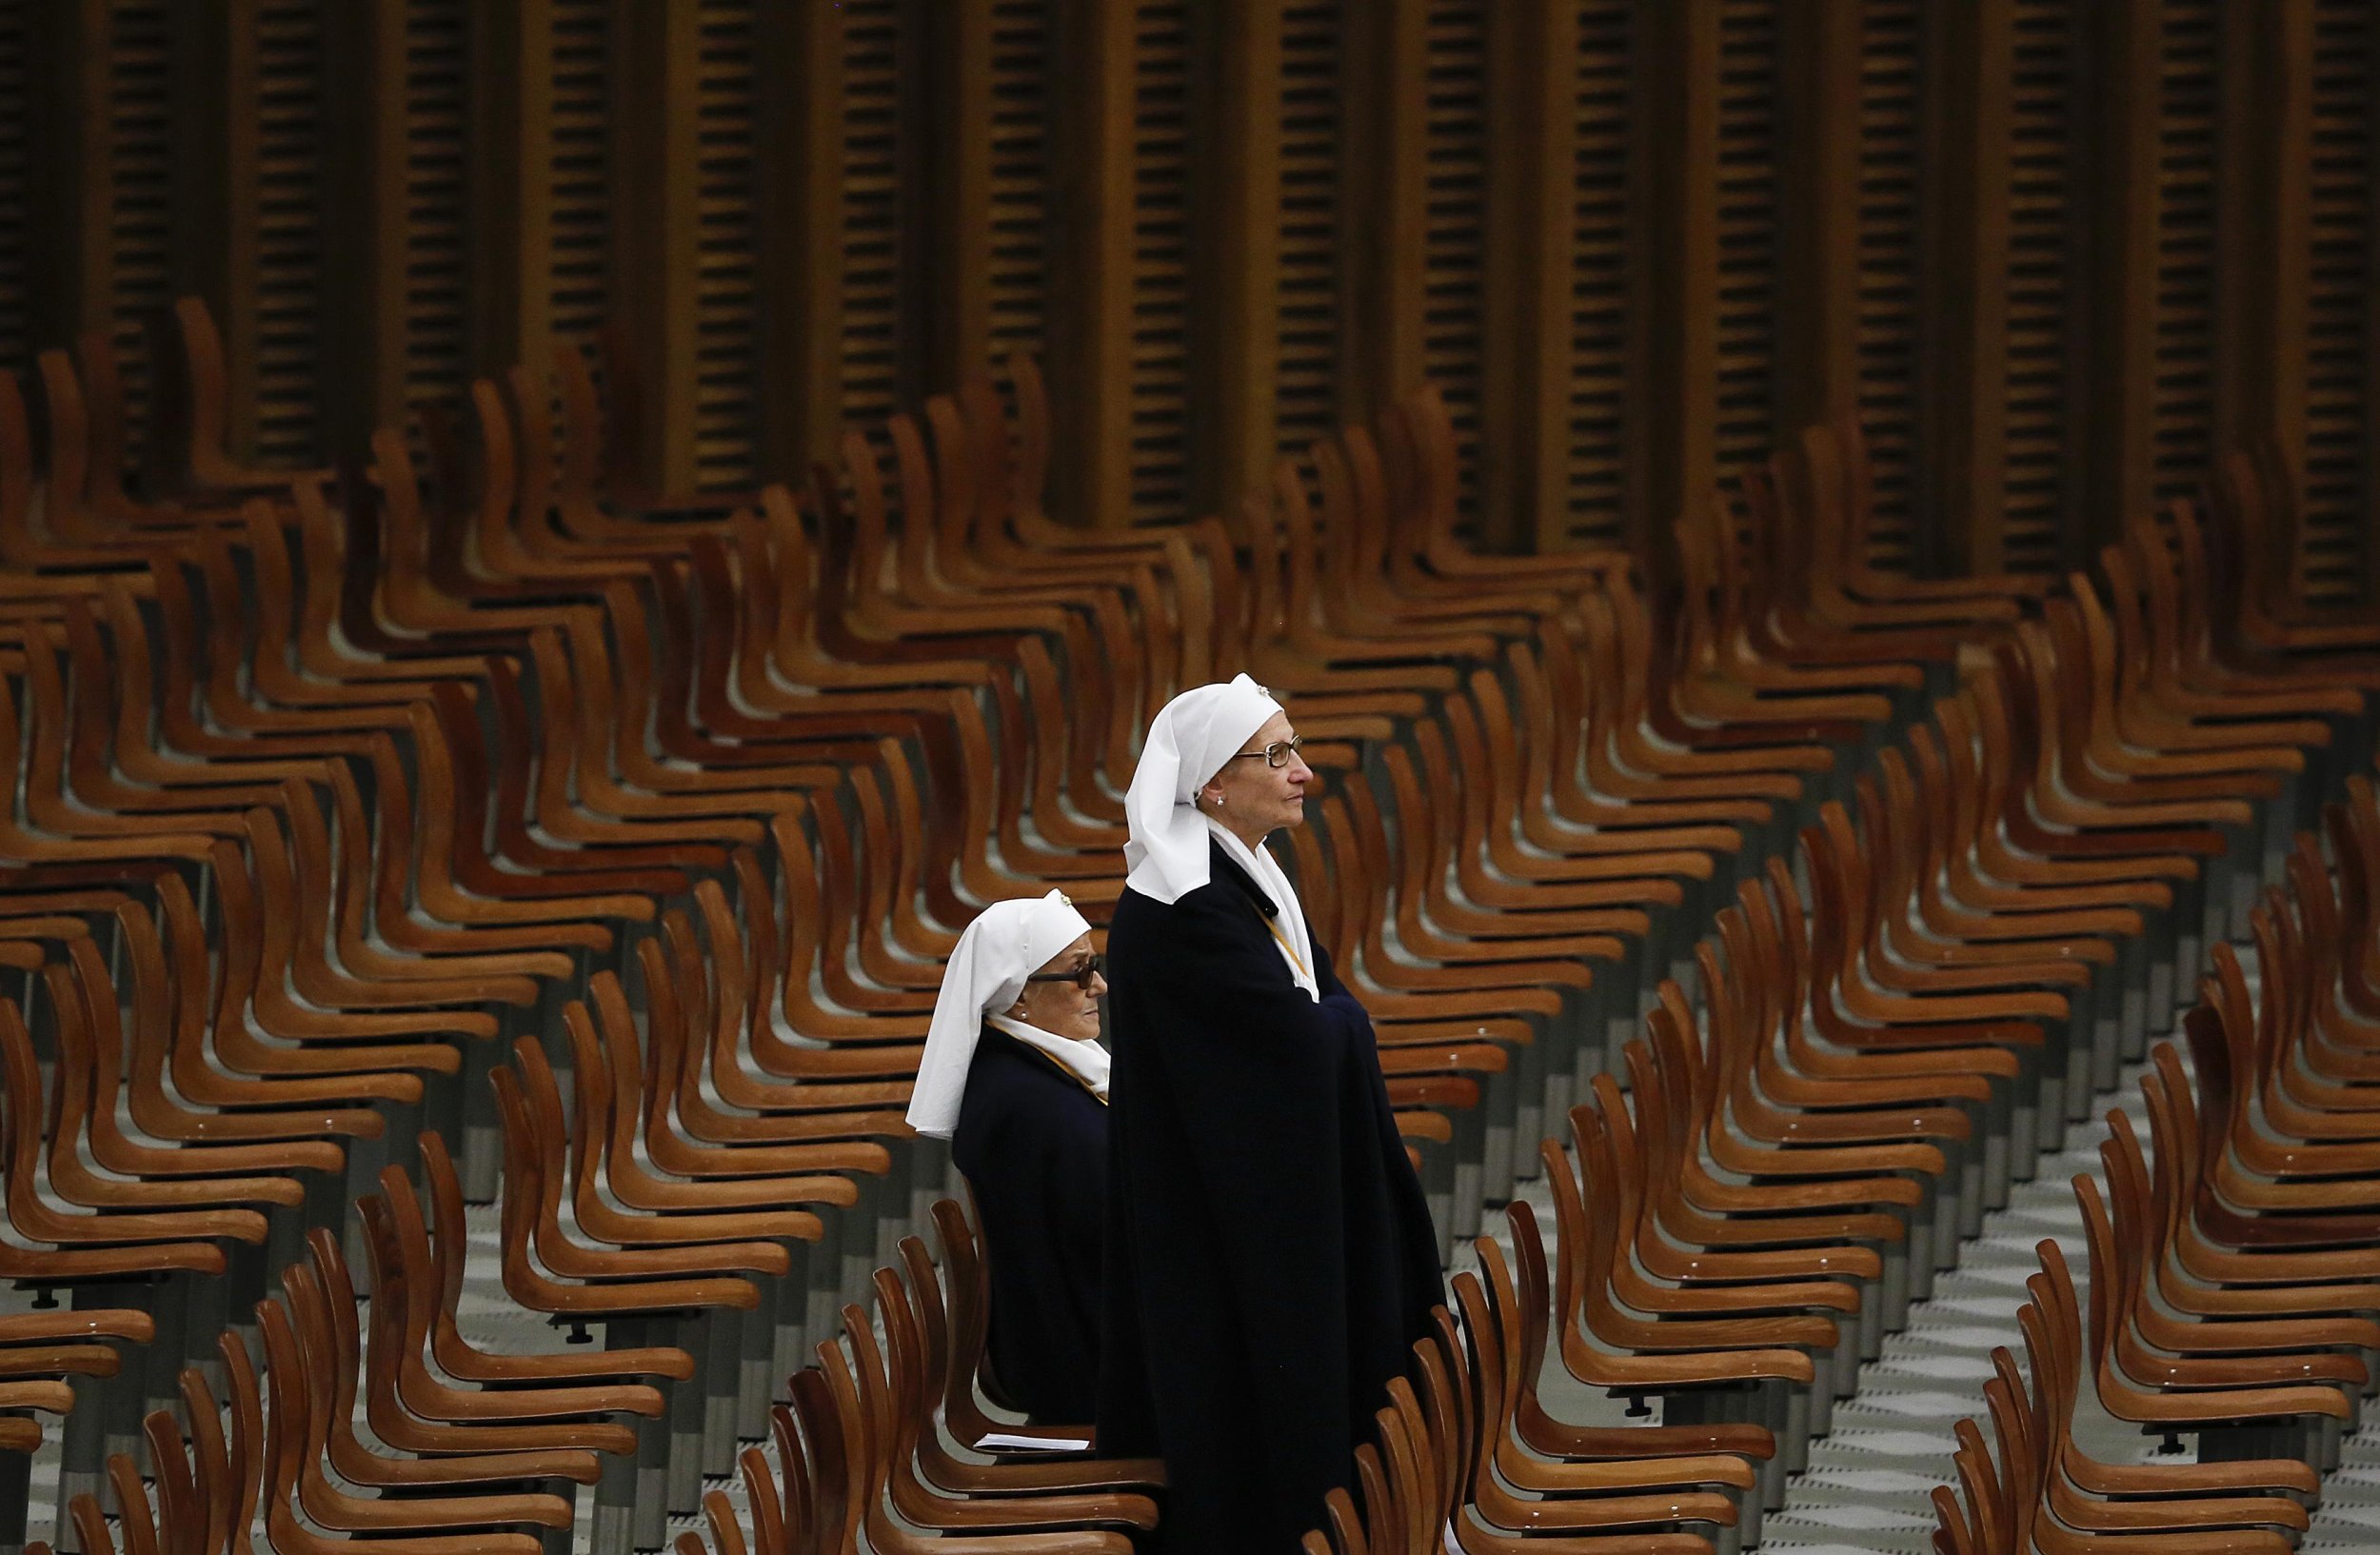 American Nuns React To New Vatican Report Saying It ‘reflects Our Reality